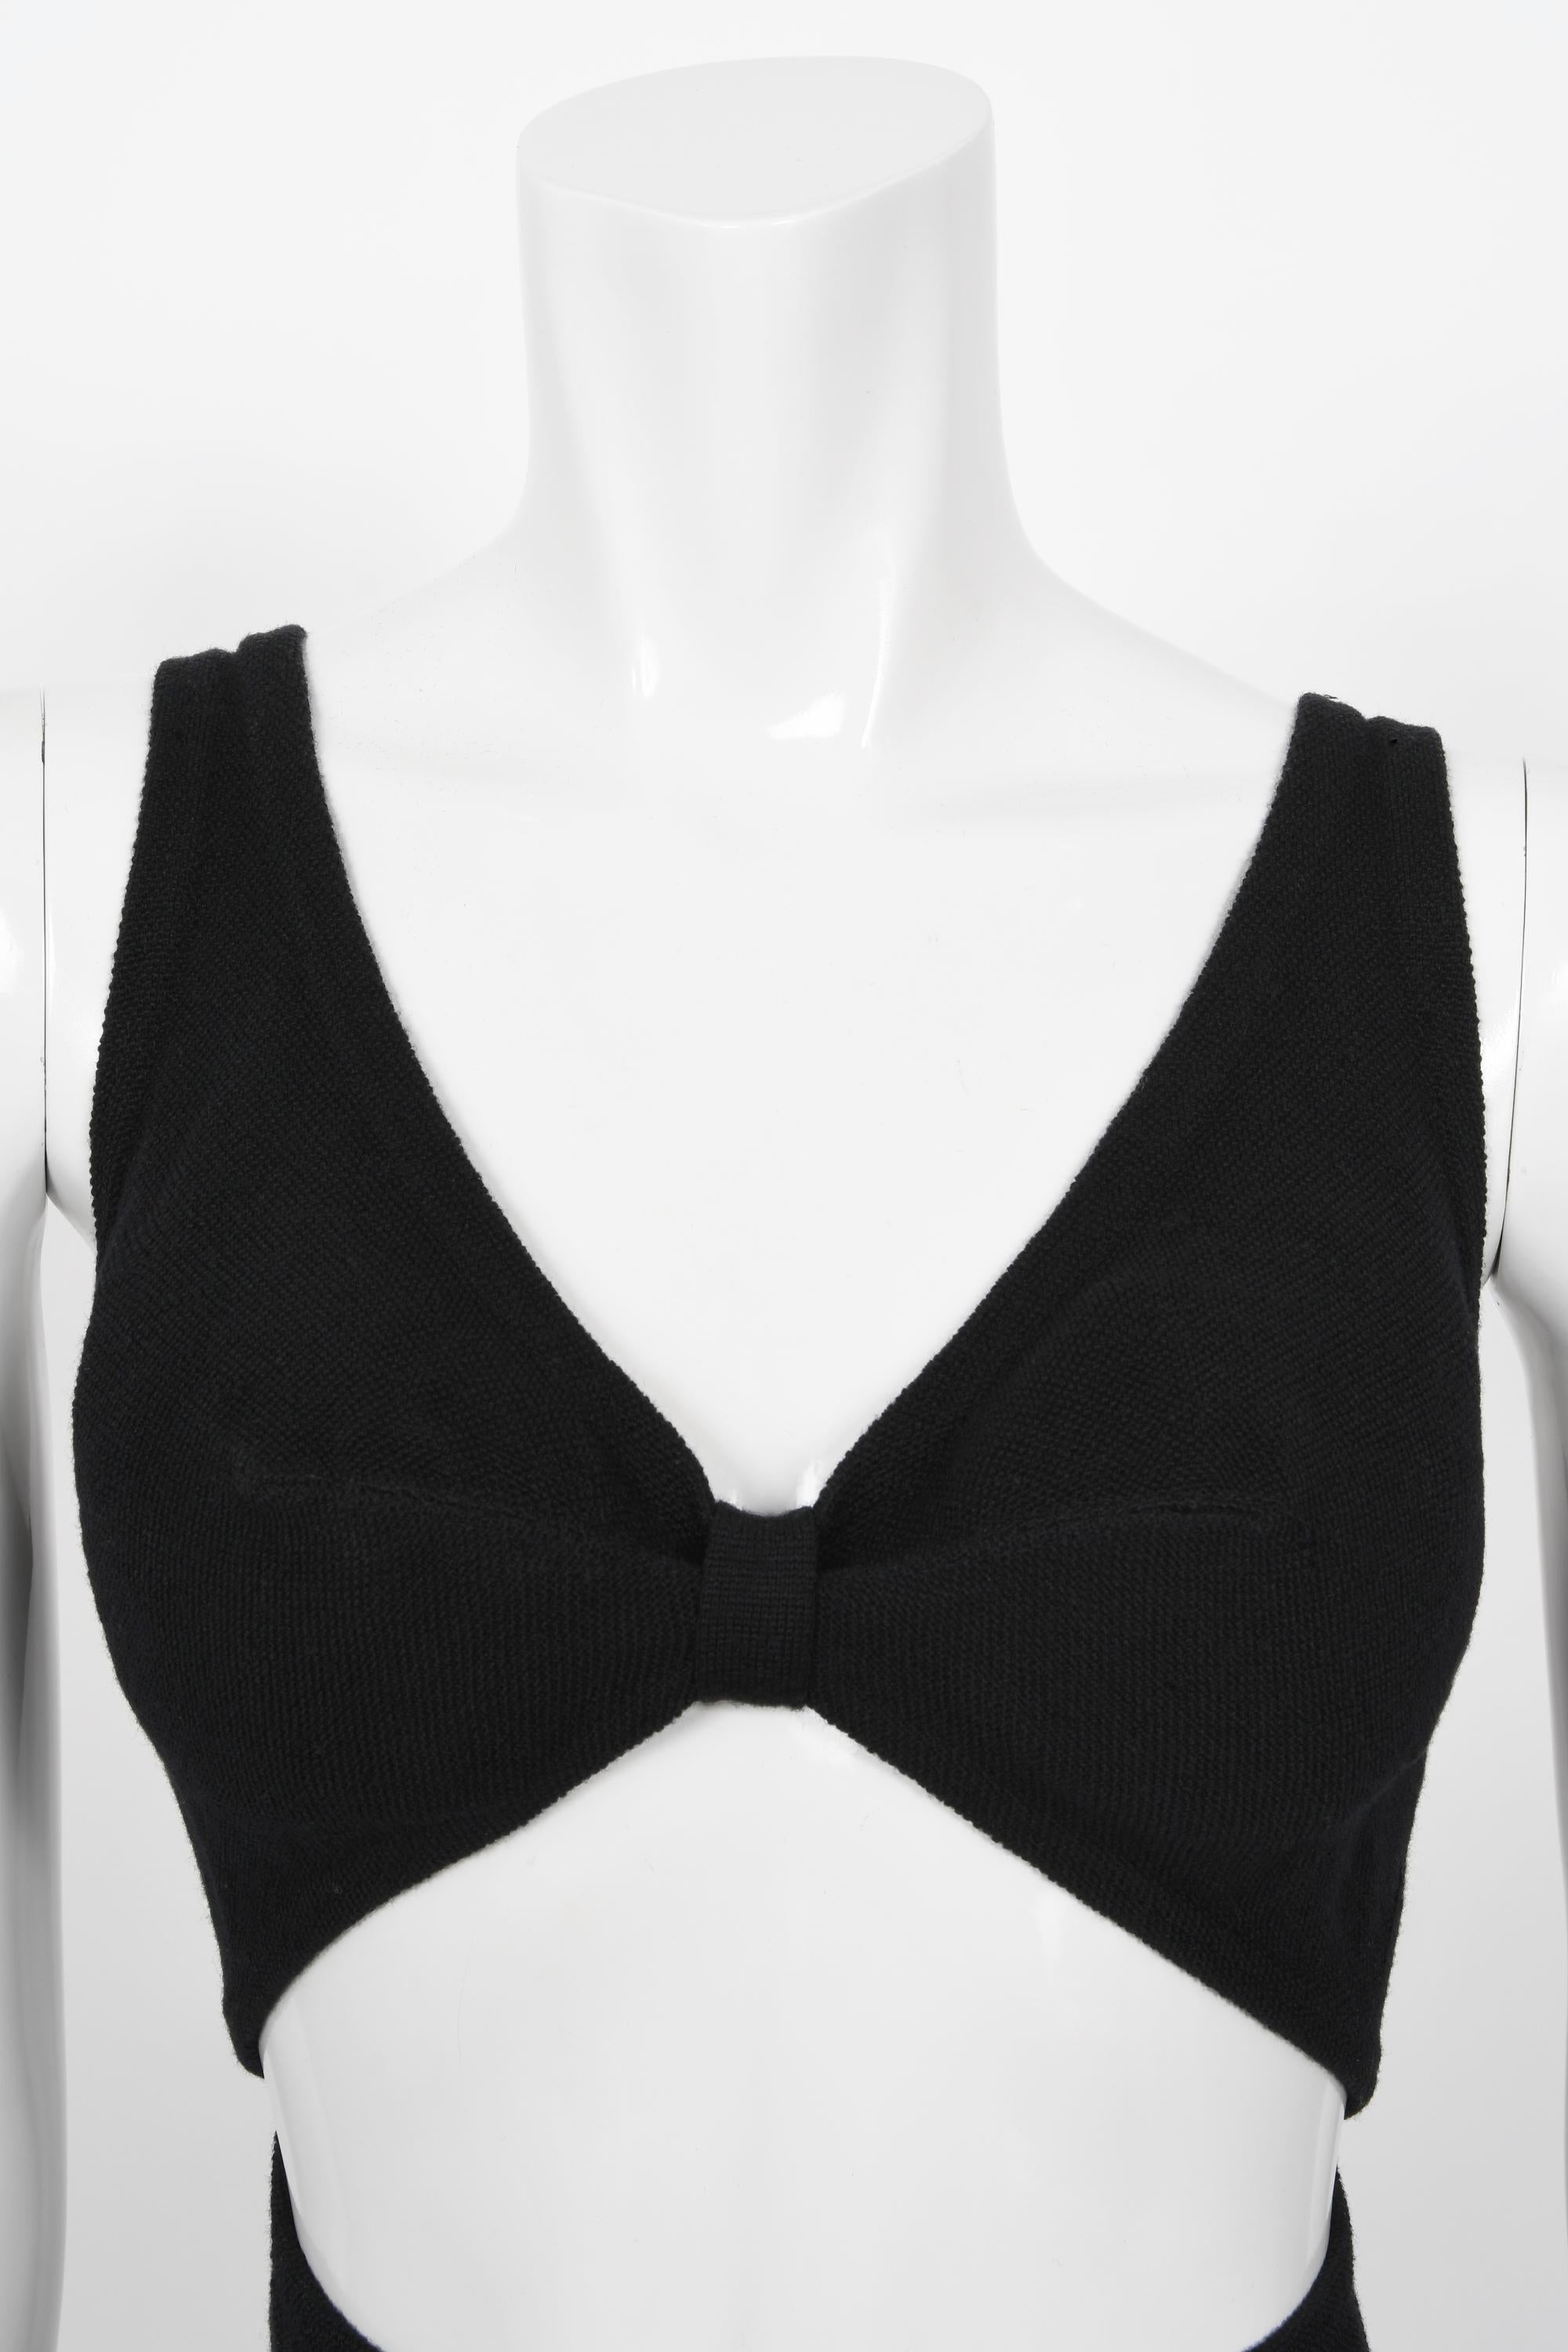 Vintage 1968 Rudi Gernreich Museum-Held Black Wool Jersey Cut Out Mod Swimsuit  In Good Condition For Sale In Beverly Hills, CA